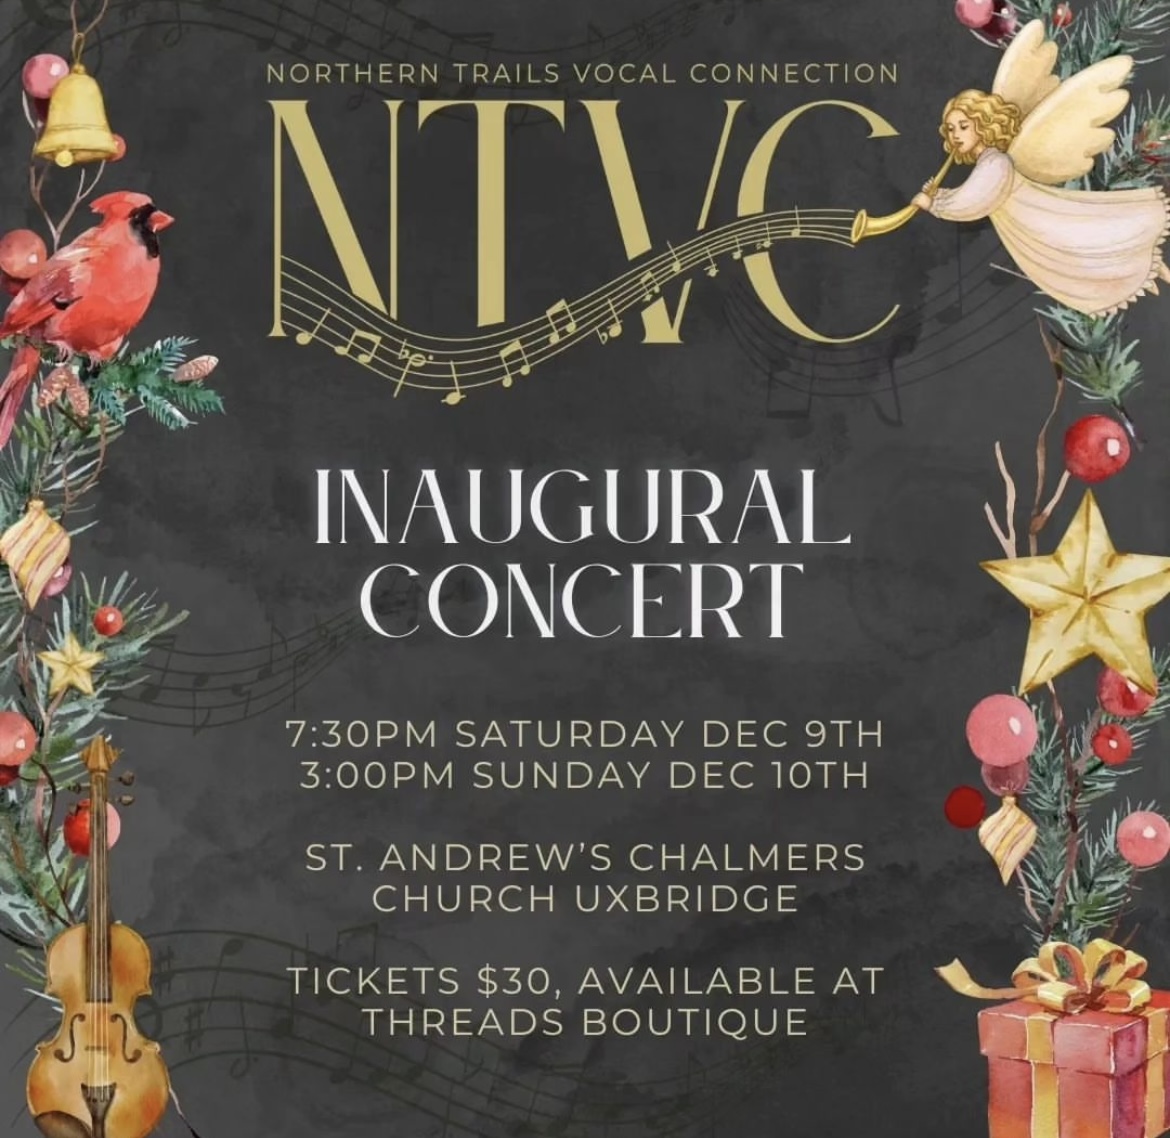 Inaugural Concert - Norther Trails